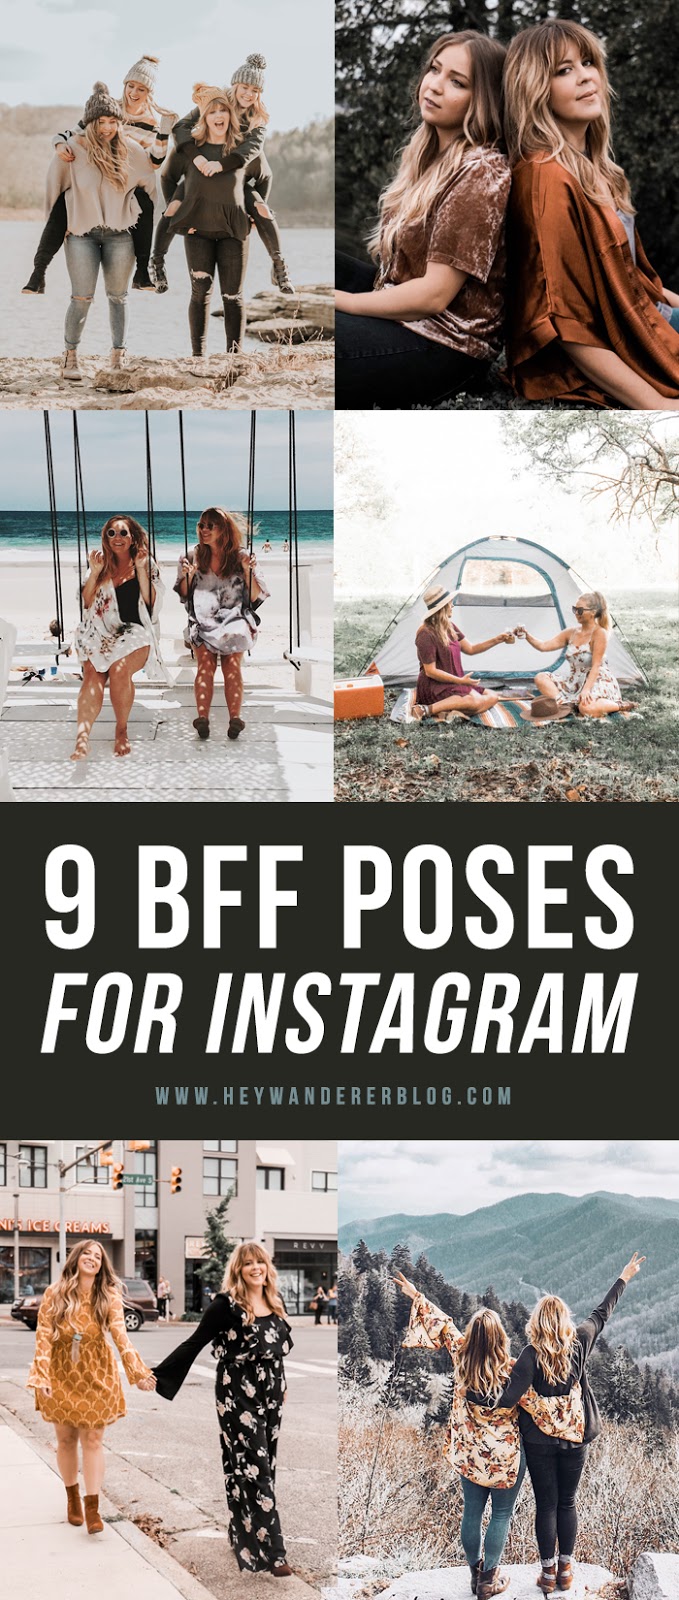 best friend poses | Best friend poses, Bff photoshoot poses, Bff poses-thanhphatduhoc.com.vn